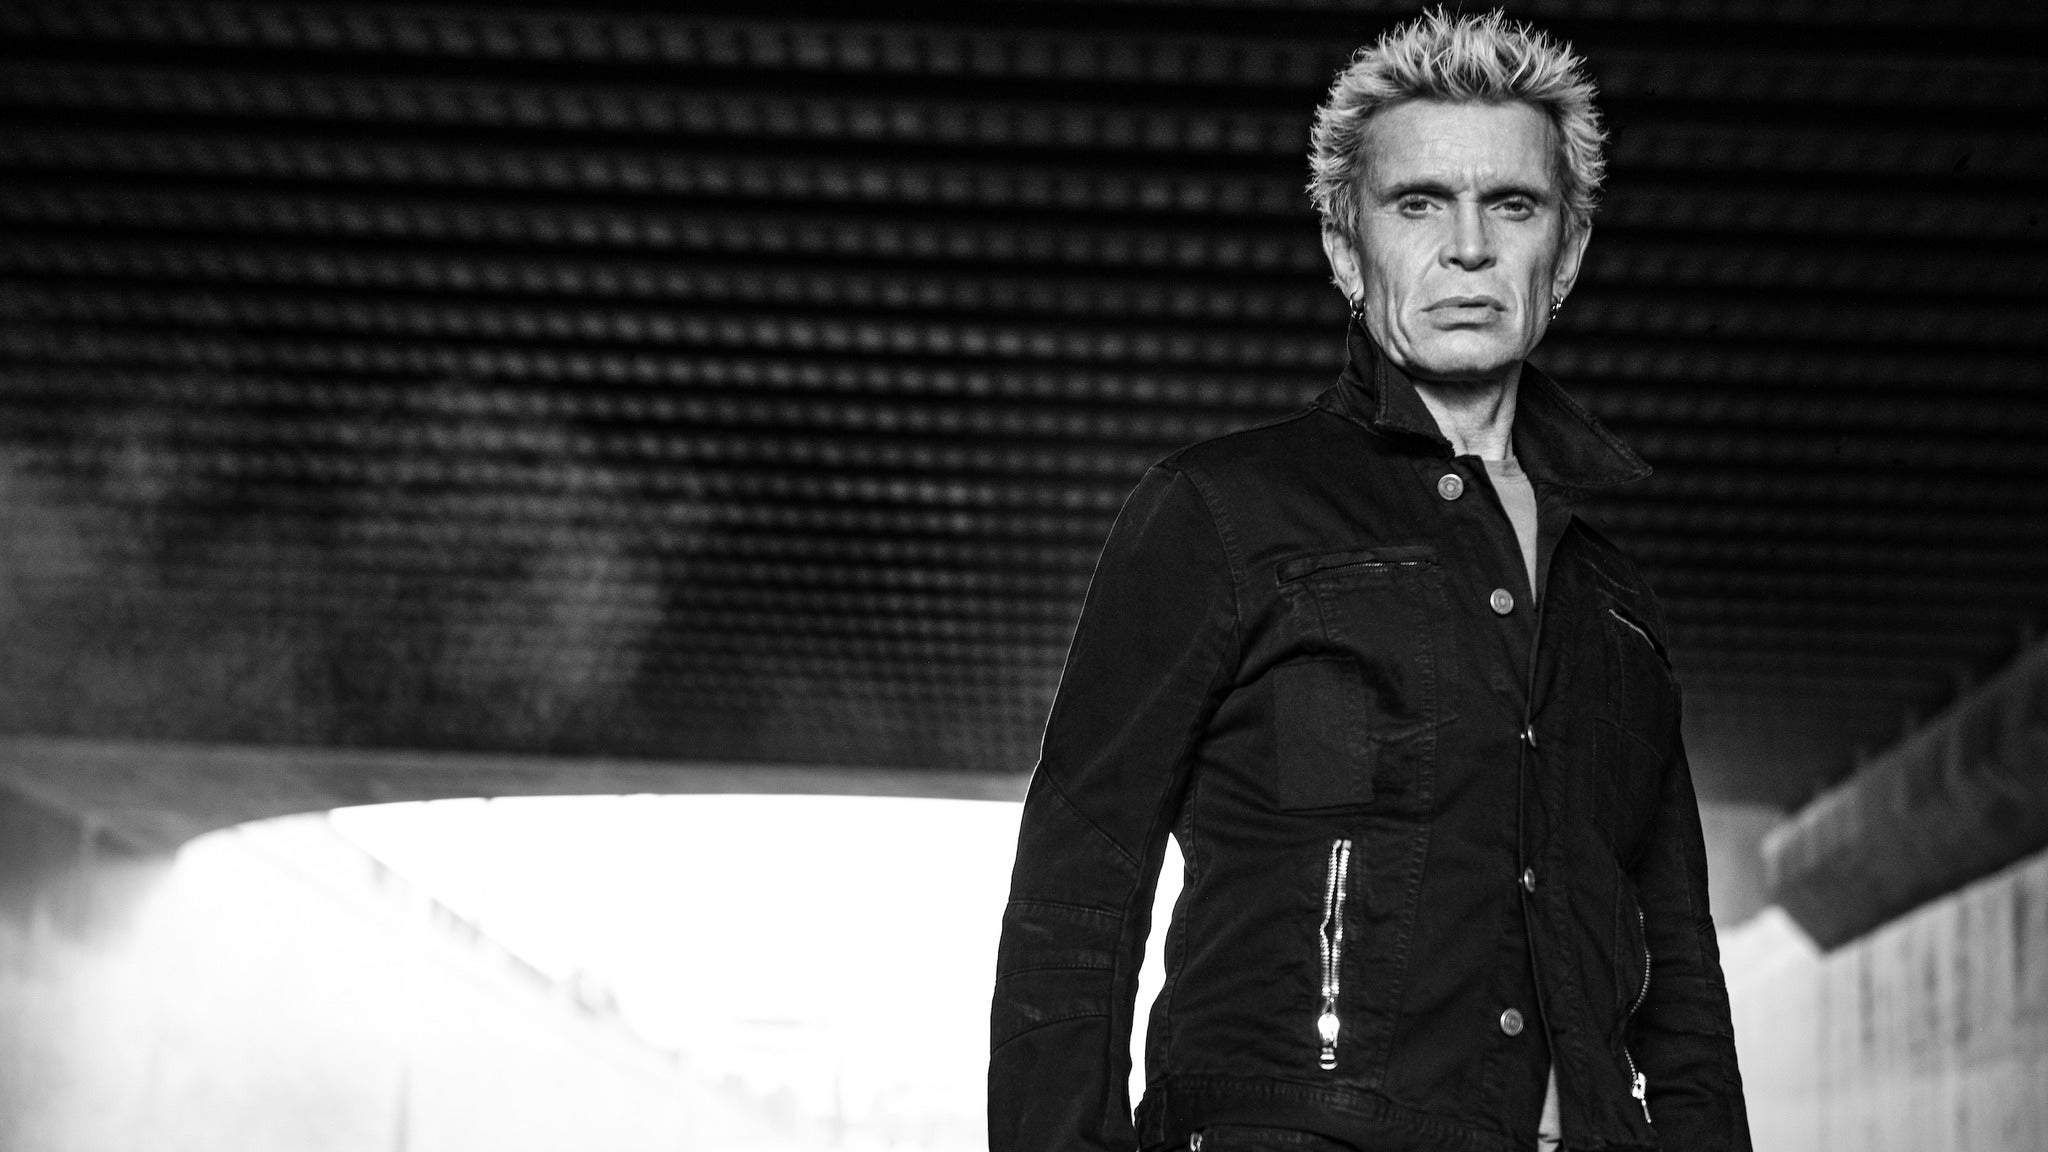 Billy Idol at The Show - Agua Caliente Casino